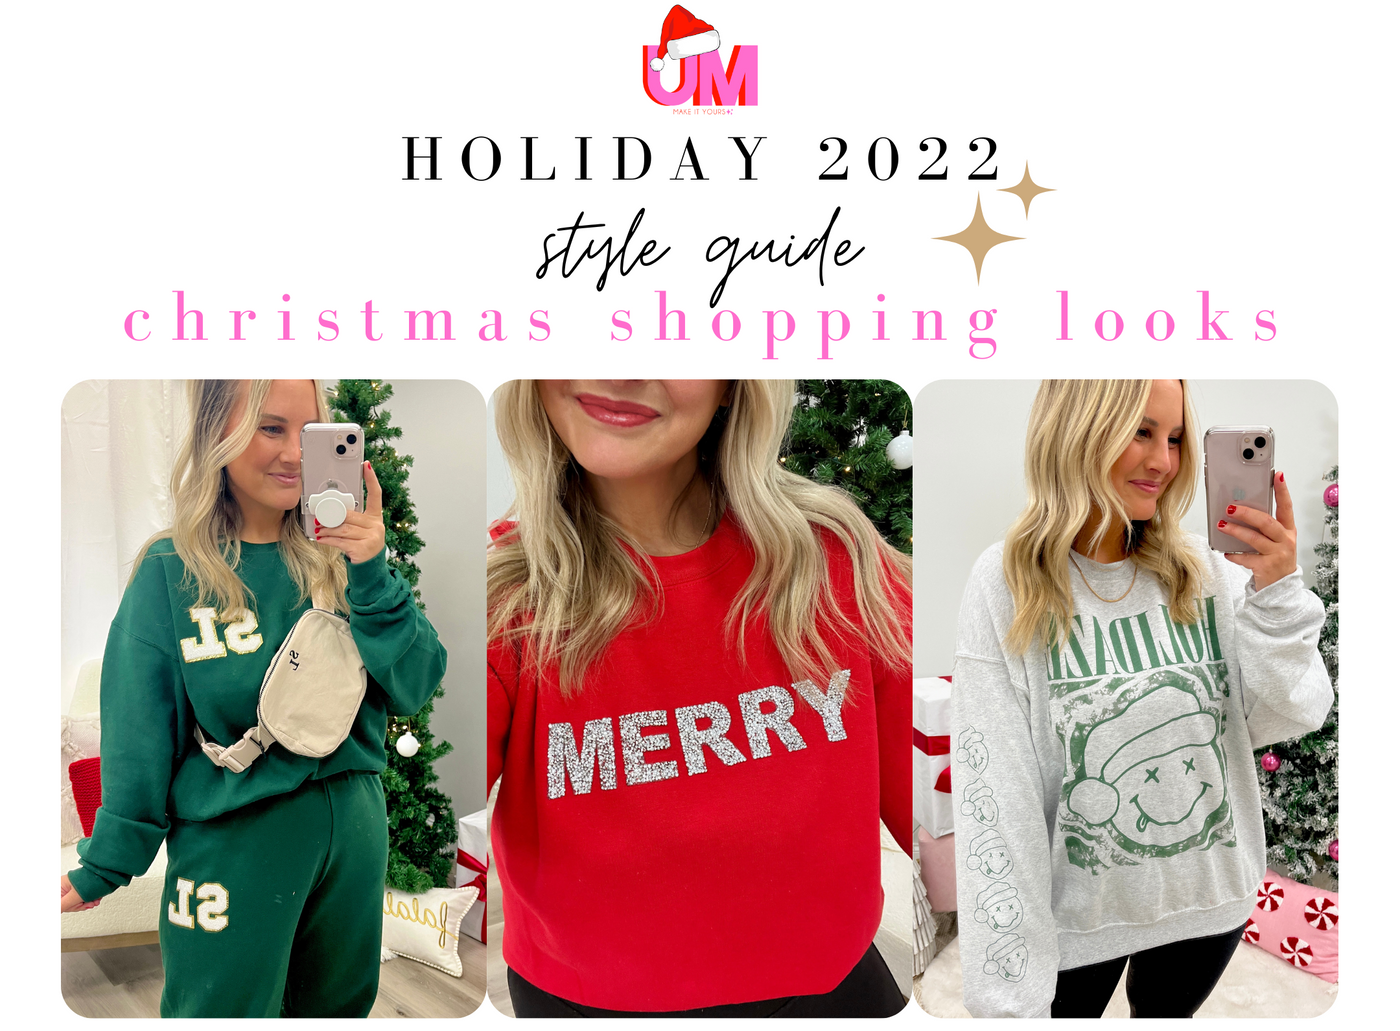 Christmas Style Guide 2022 - Christmas Shopping Looks